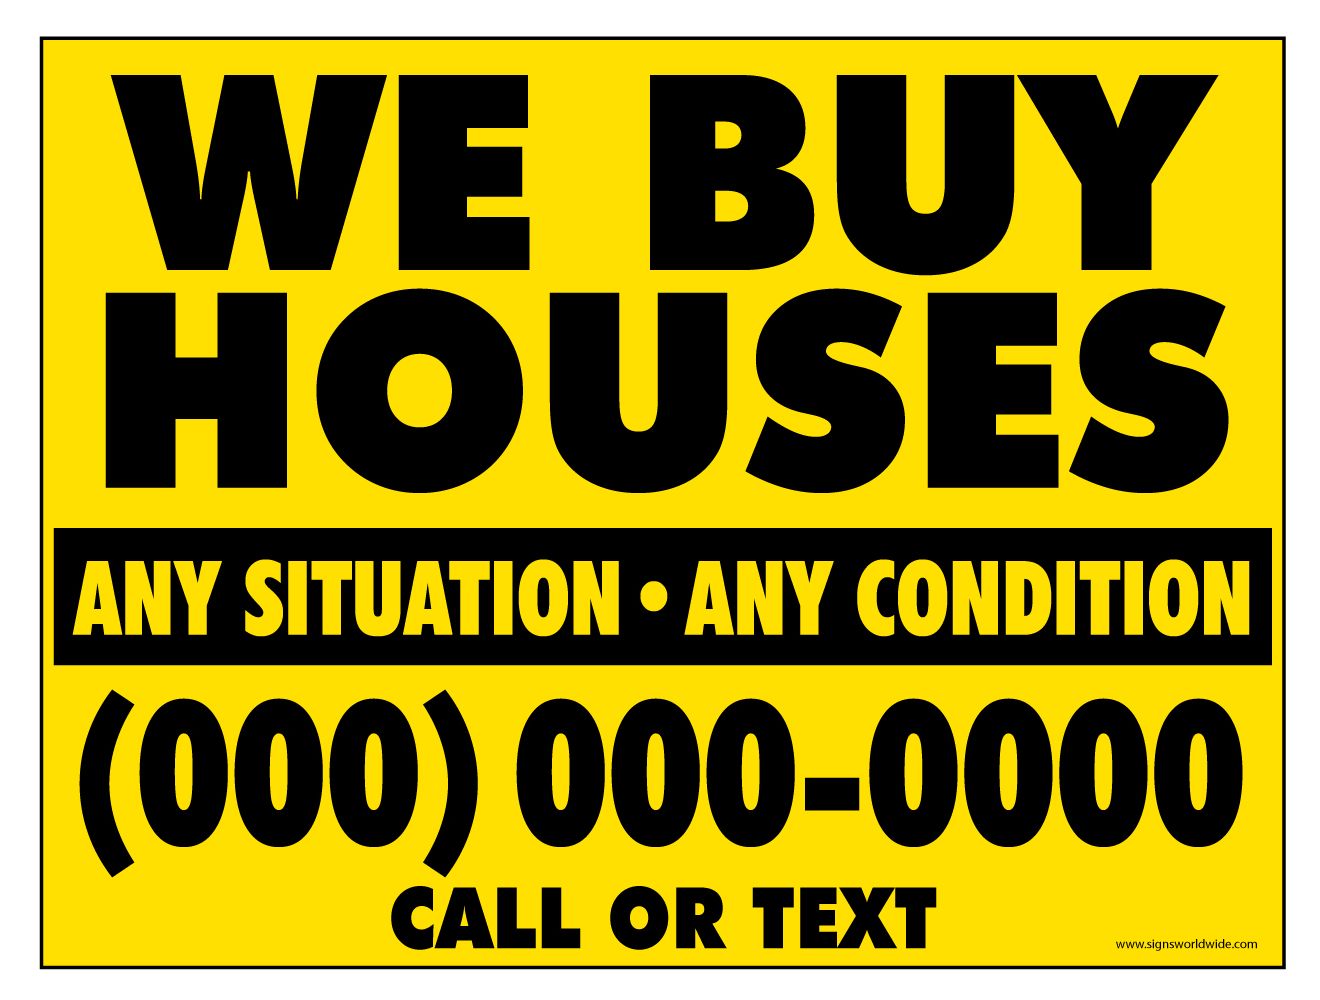 We buy houses cash - Quality Properties of North West Florida LLC